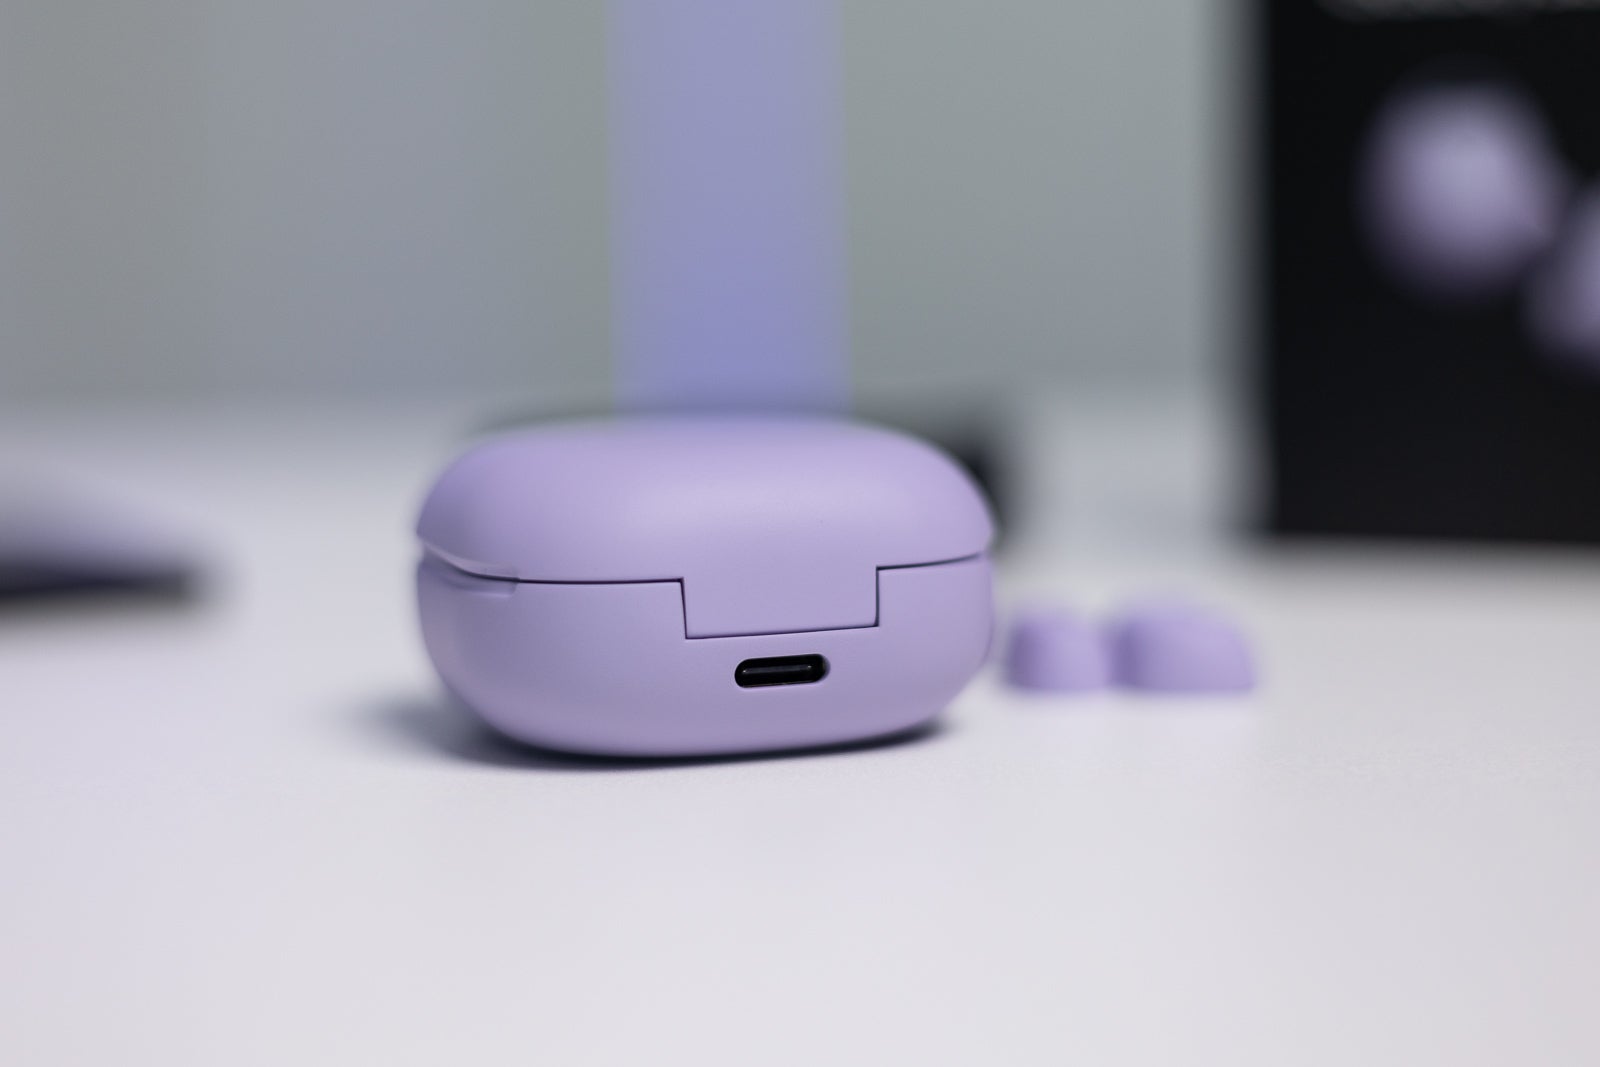 (Image credit - PhoneArena) Galaxy Buds 2 Pro charging case, back - Galaxy Buds 2 Pro review: Sleeker design, but is it worth the price jump?